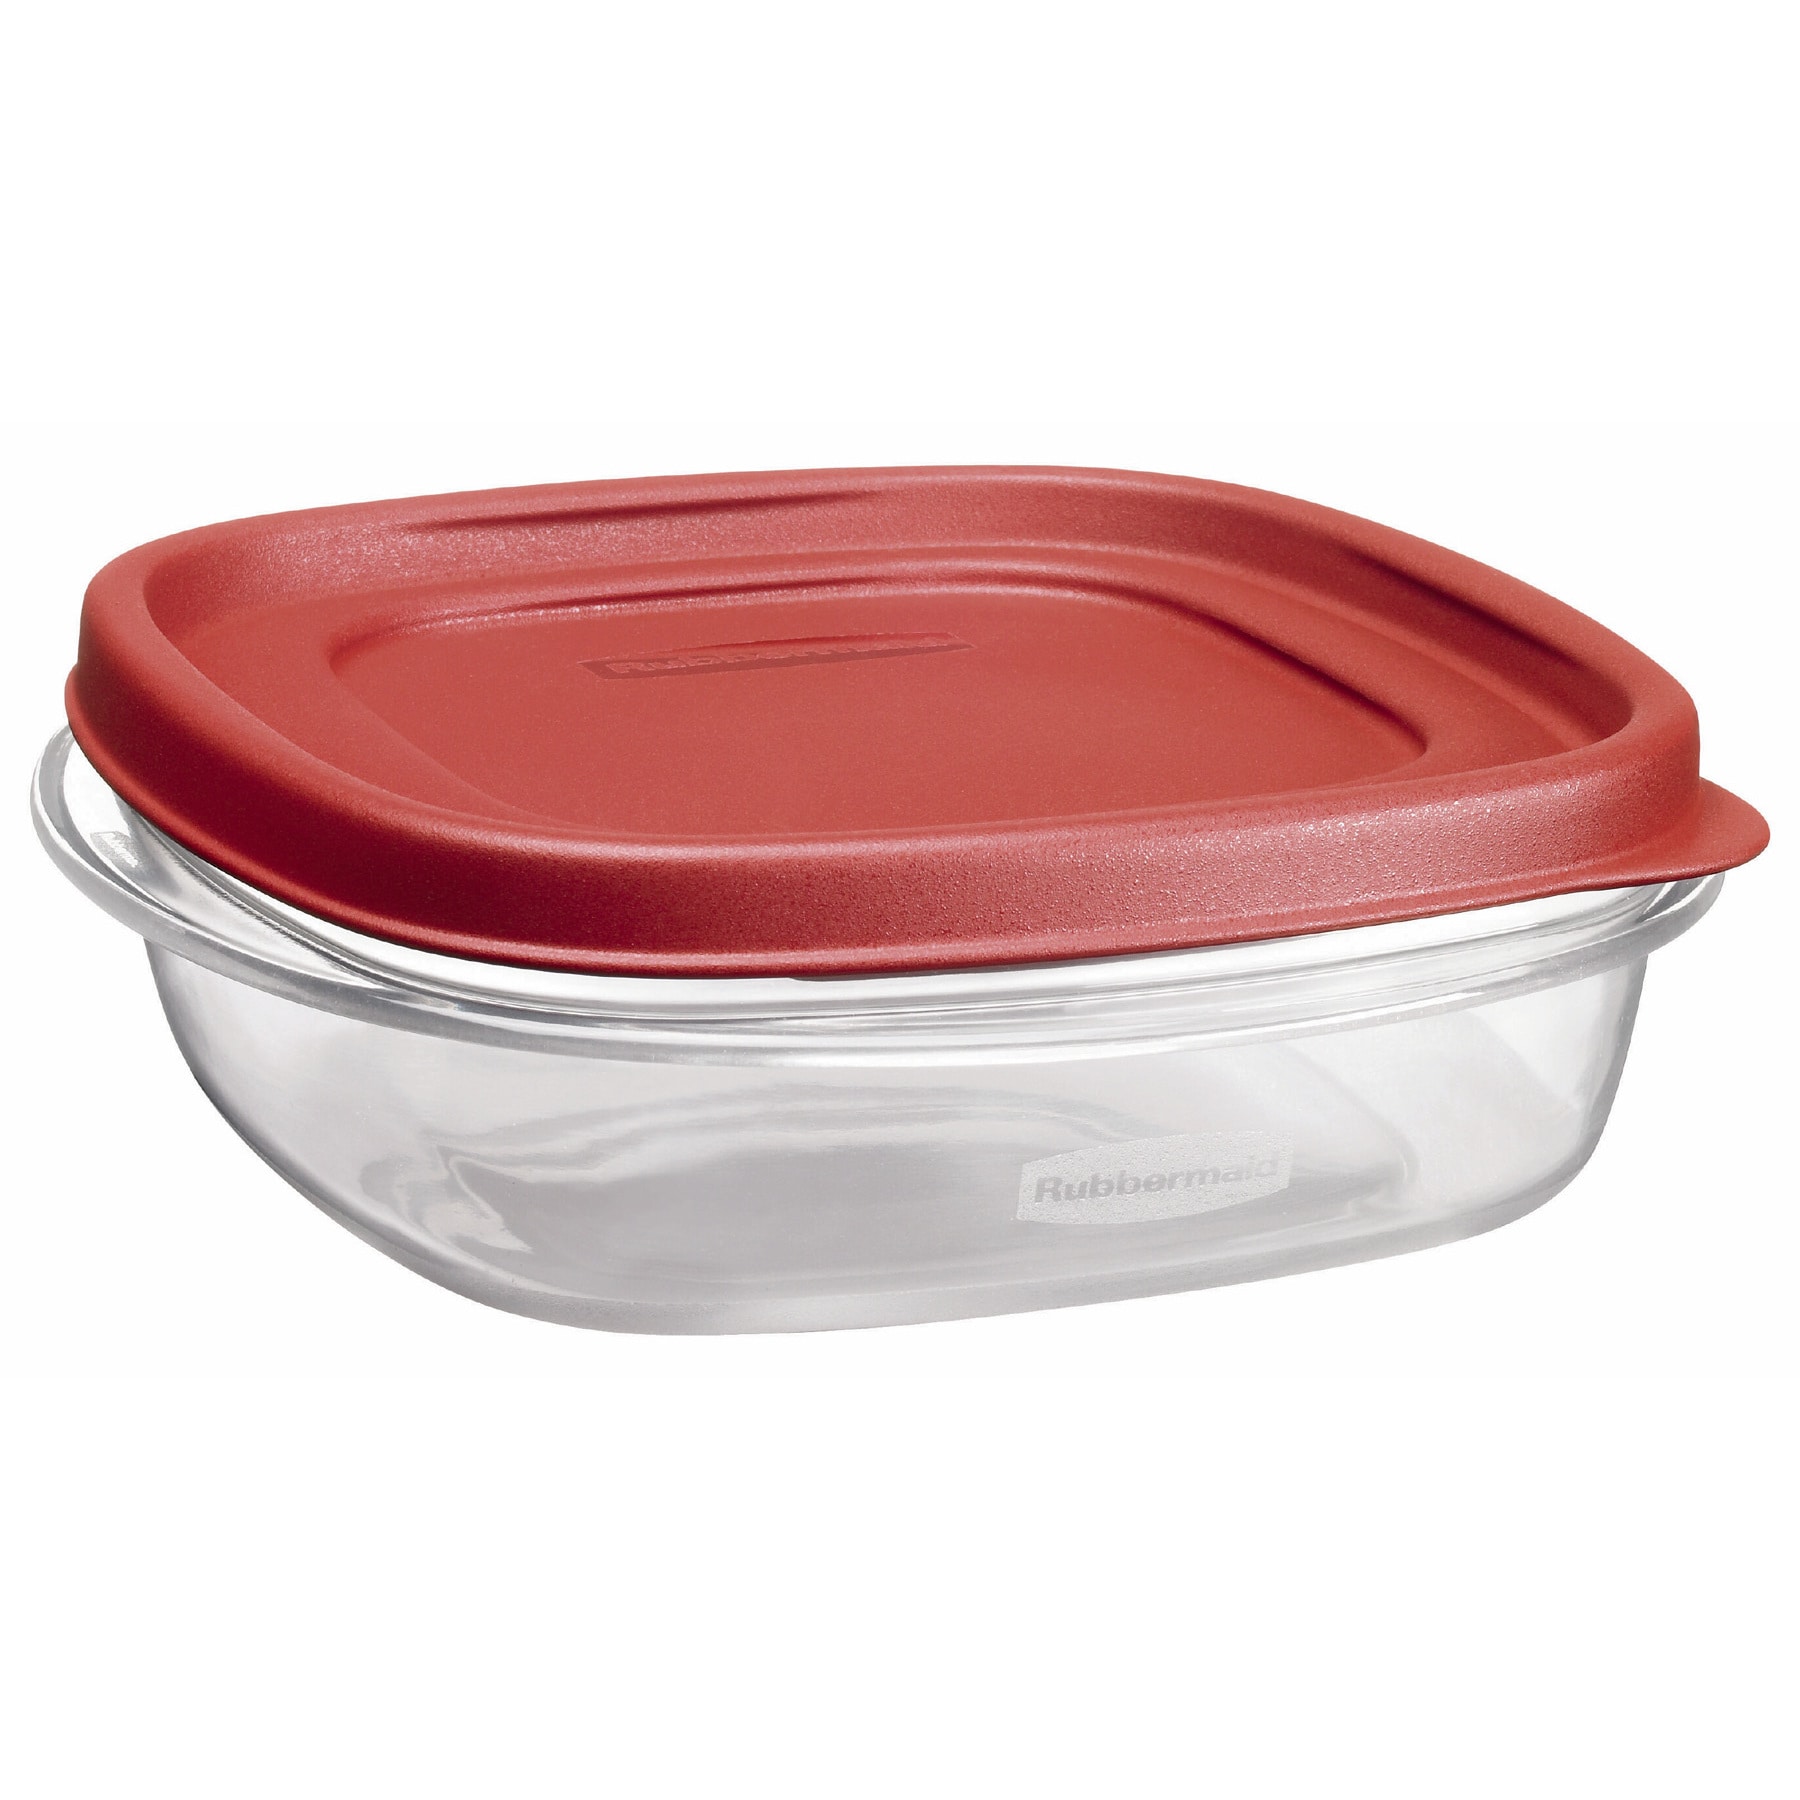 Rubbermaid 3 Cup Square Chili Red Easy Find Container